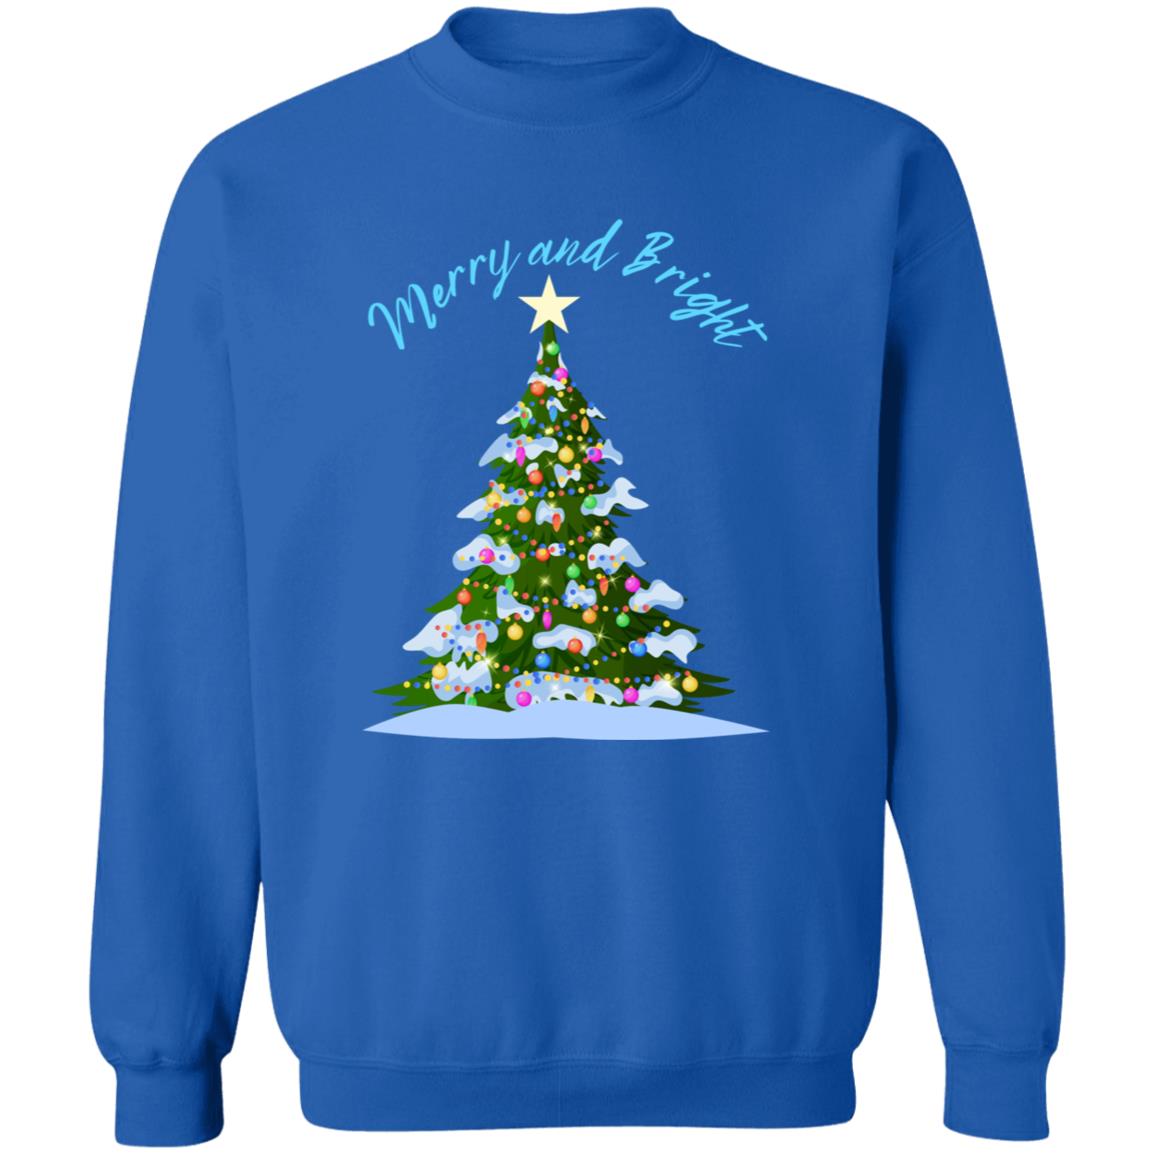 Merry and Bright - Pullover Sweatshirt